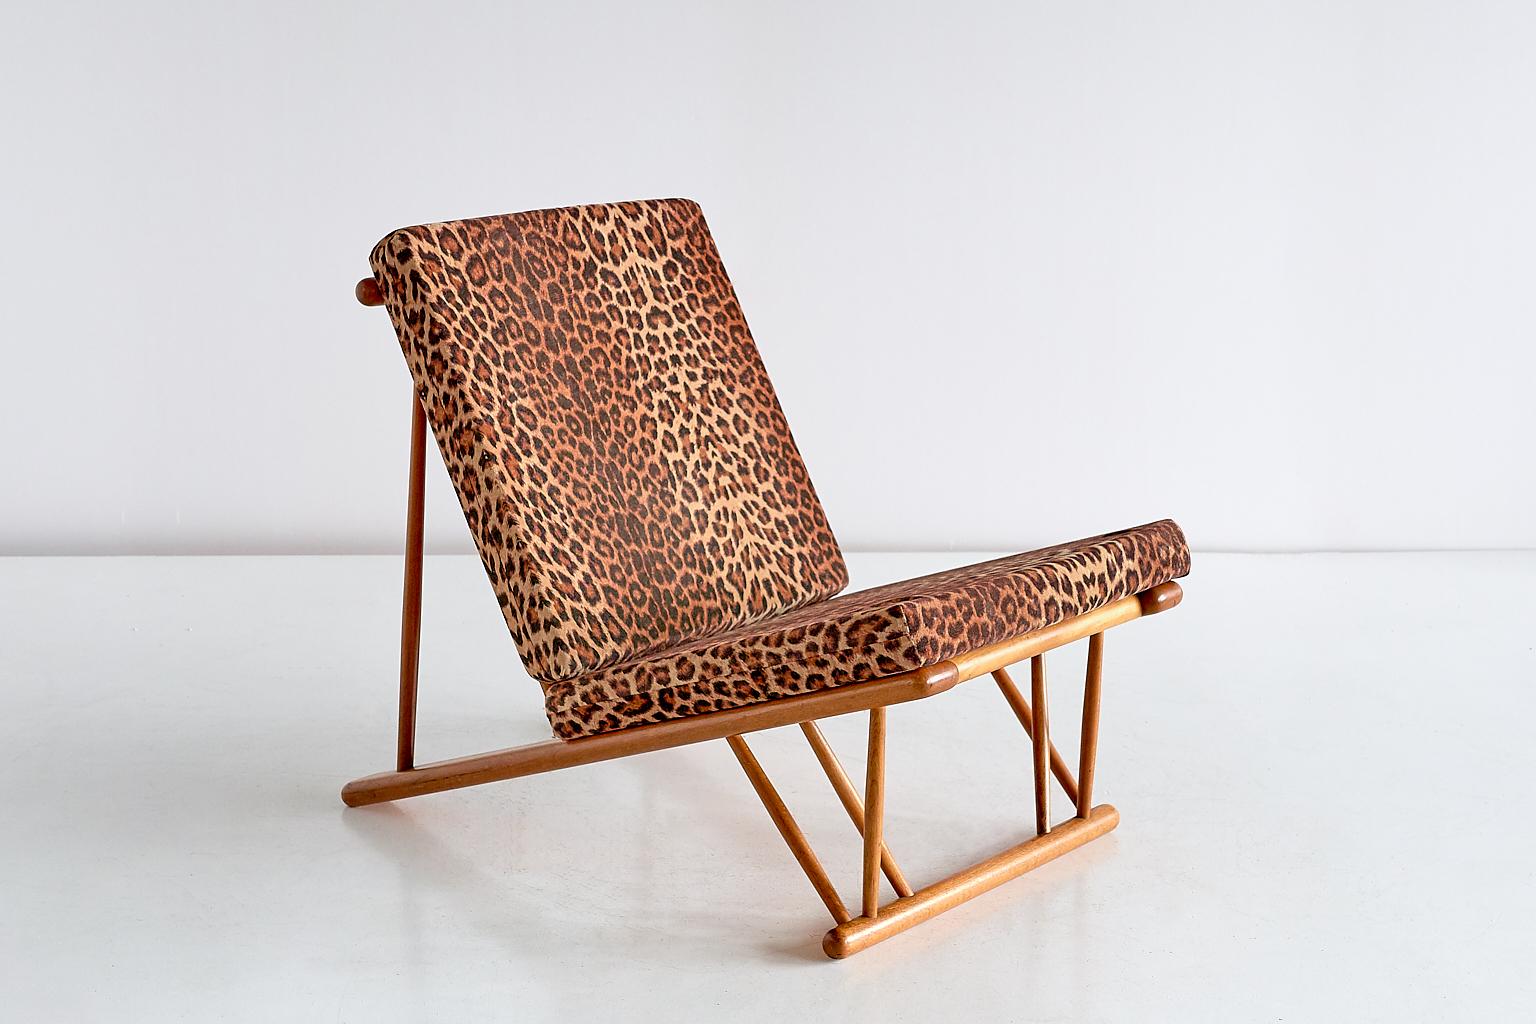 This rare lounge chair was designed by Poul M. Volther in 1954. This particular model J 58 was produced by the Danish manufacturer FDB Møbler for a short period of time in the 1950s. The striking frame of the easy chair is made of natural lacquered